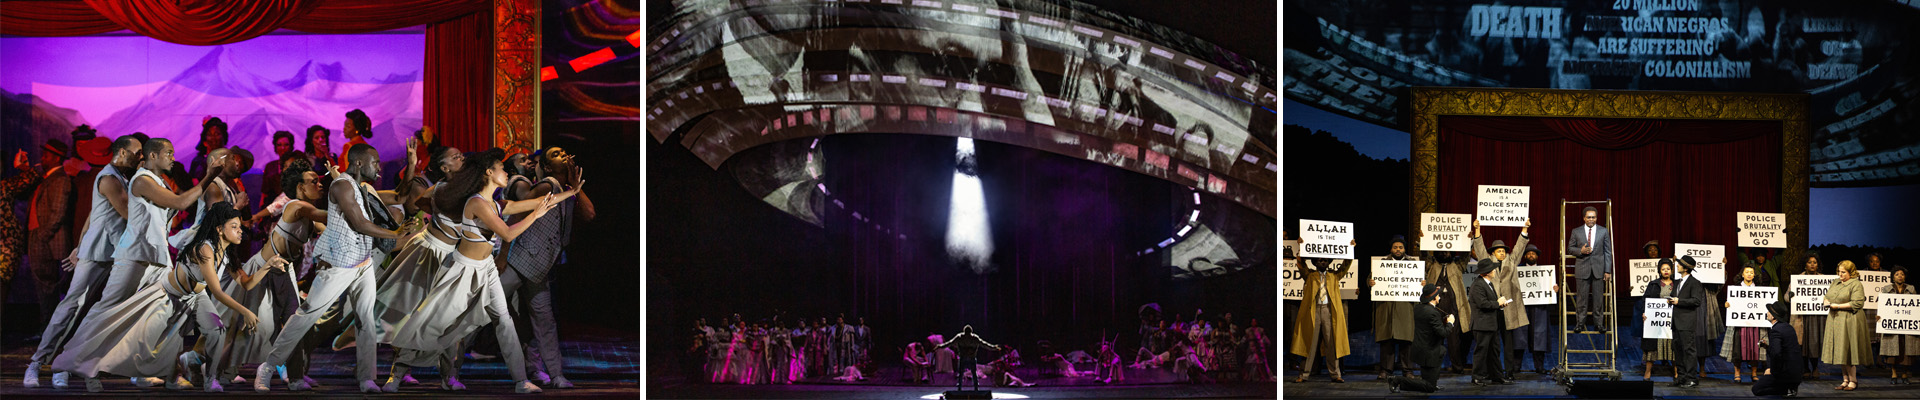 Three images showing scenes from the X opera: figures in a group dance; a wide shot of the theater with a film strip projected above; a scene of Malcolm X framed by activists with signs